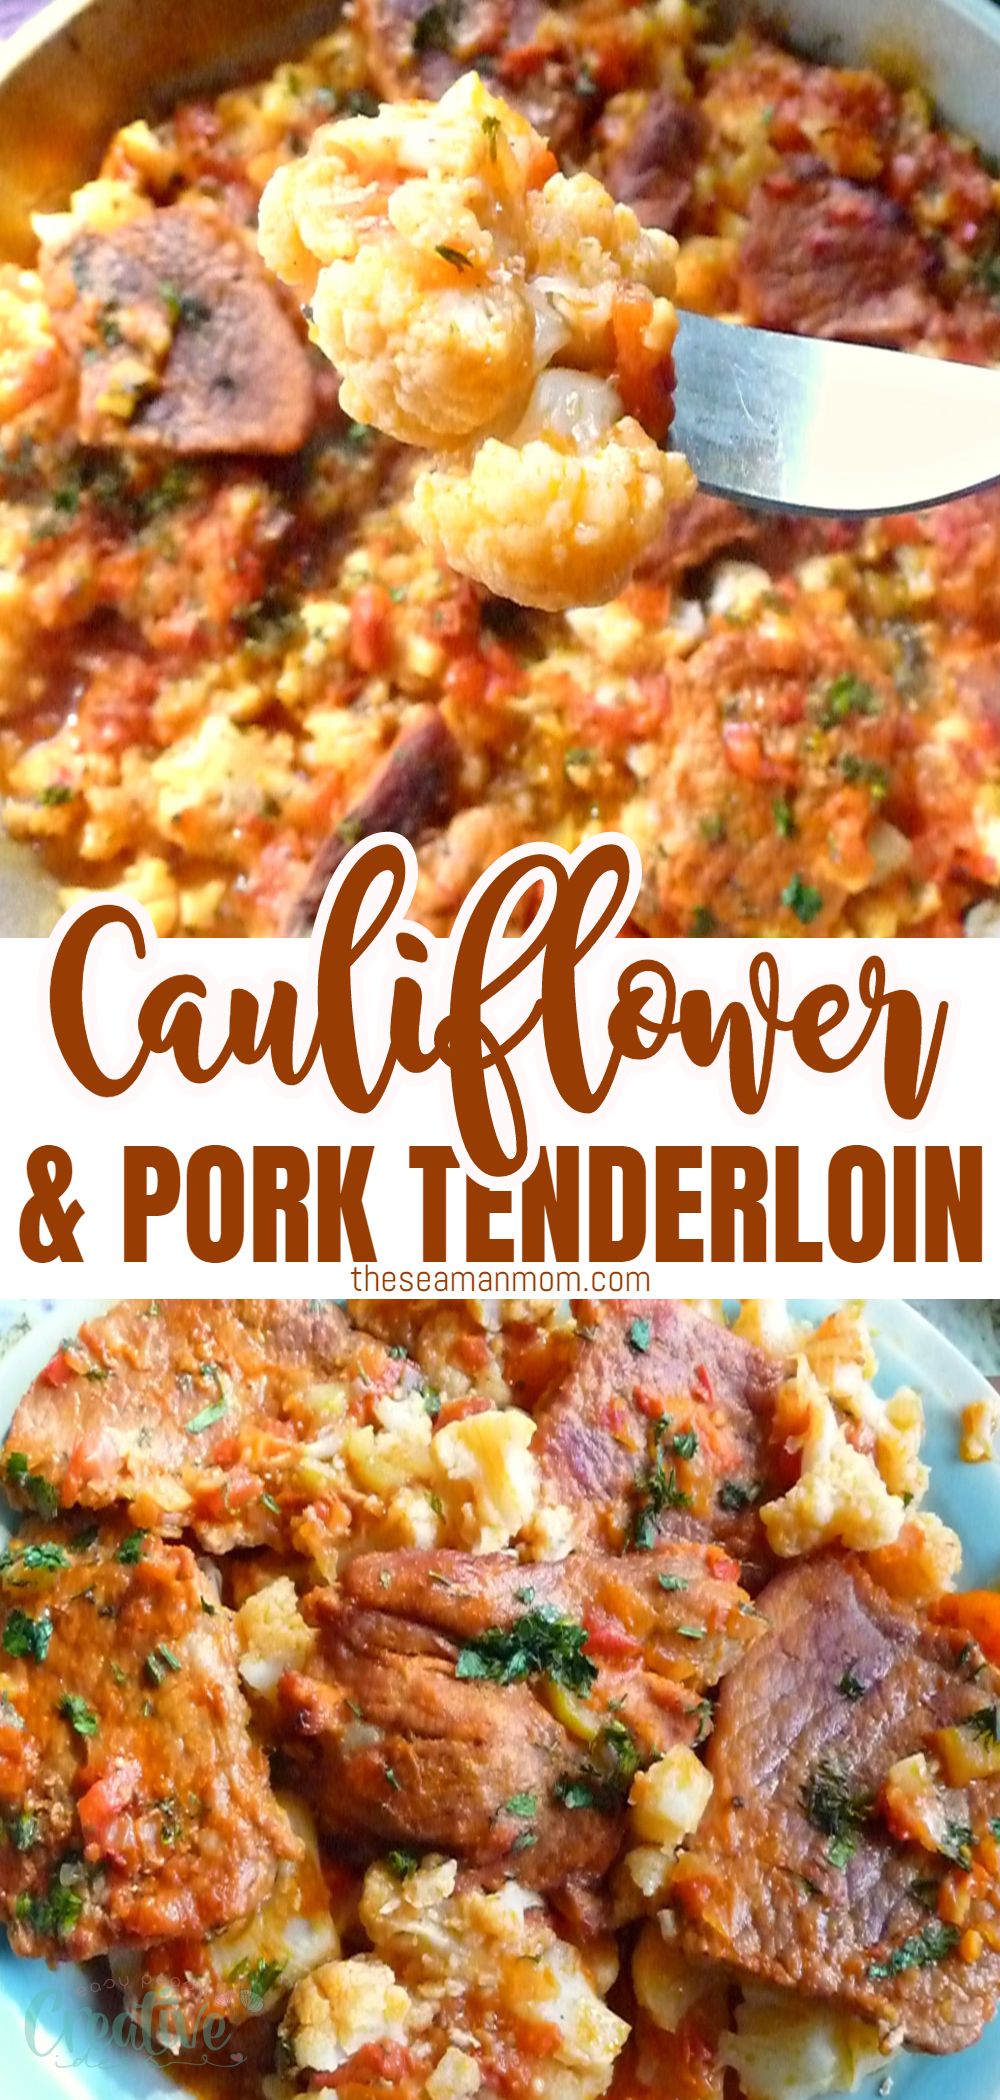 If you're looking for a quick, easy and simple dinner idea that tastes like a million bucks, you'll want to give this pork and cauliflower recipe a try today! via @petroneagu